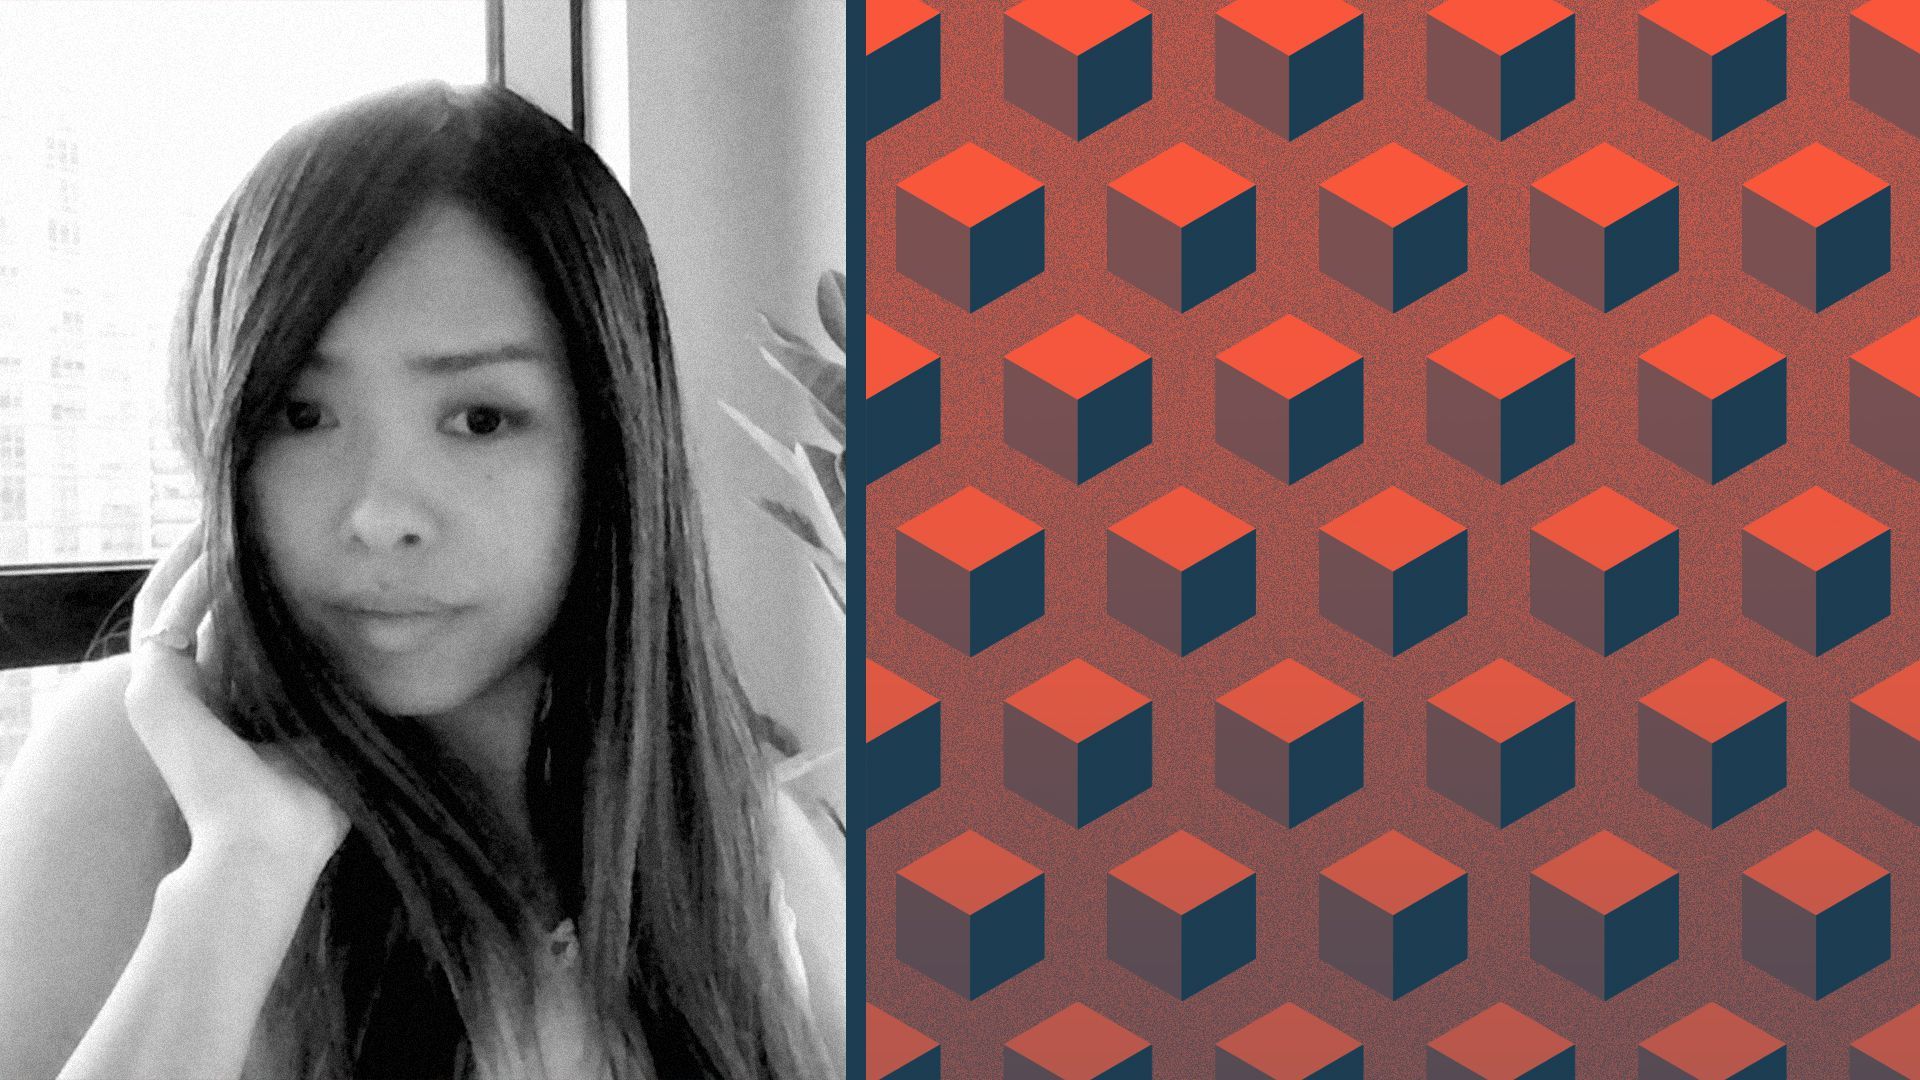 Photo illustration of Michelle Chiu next to a pattern of red and blue blocks.